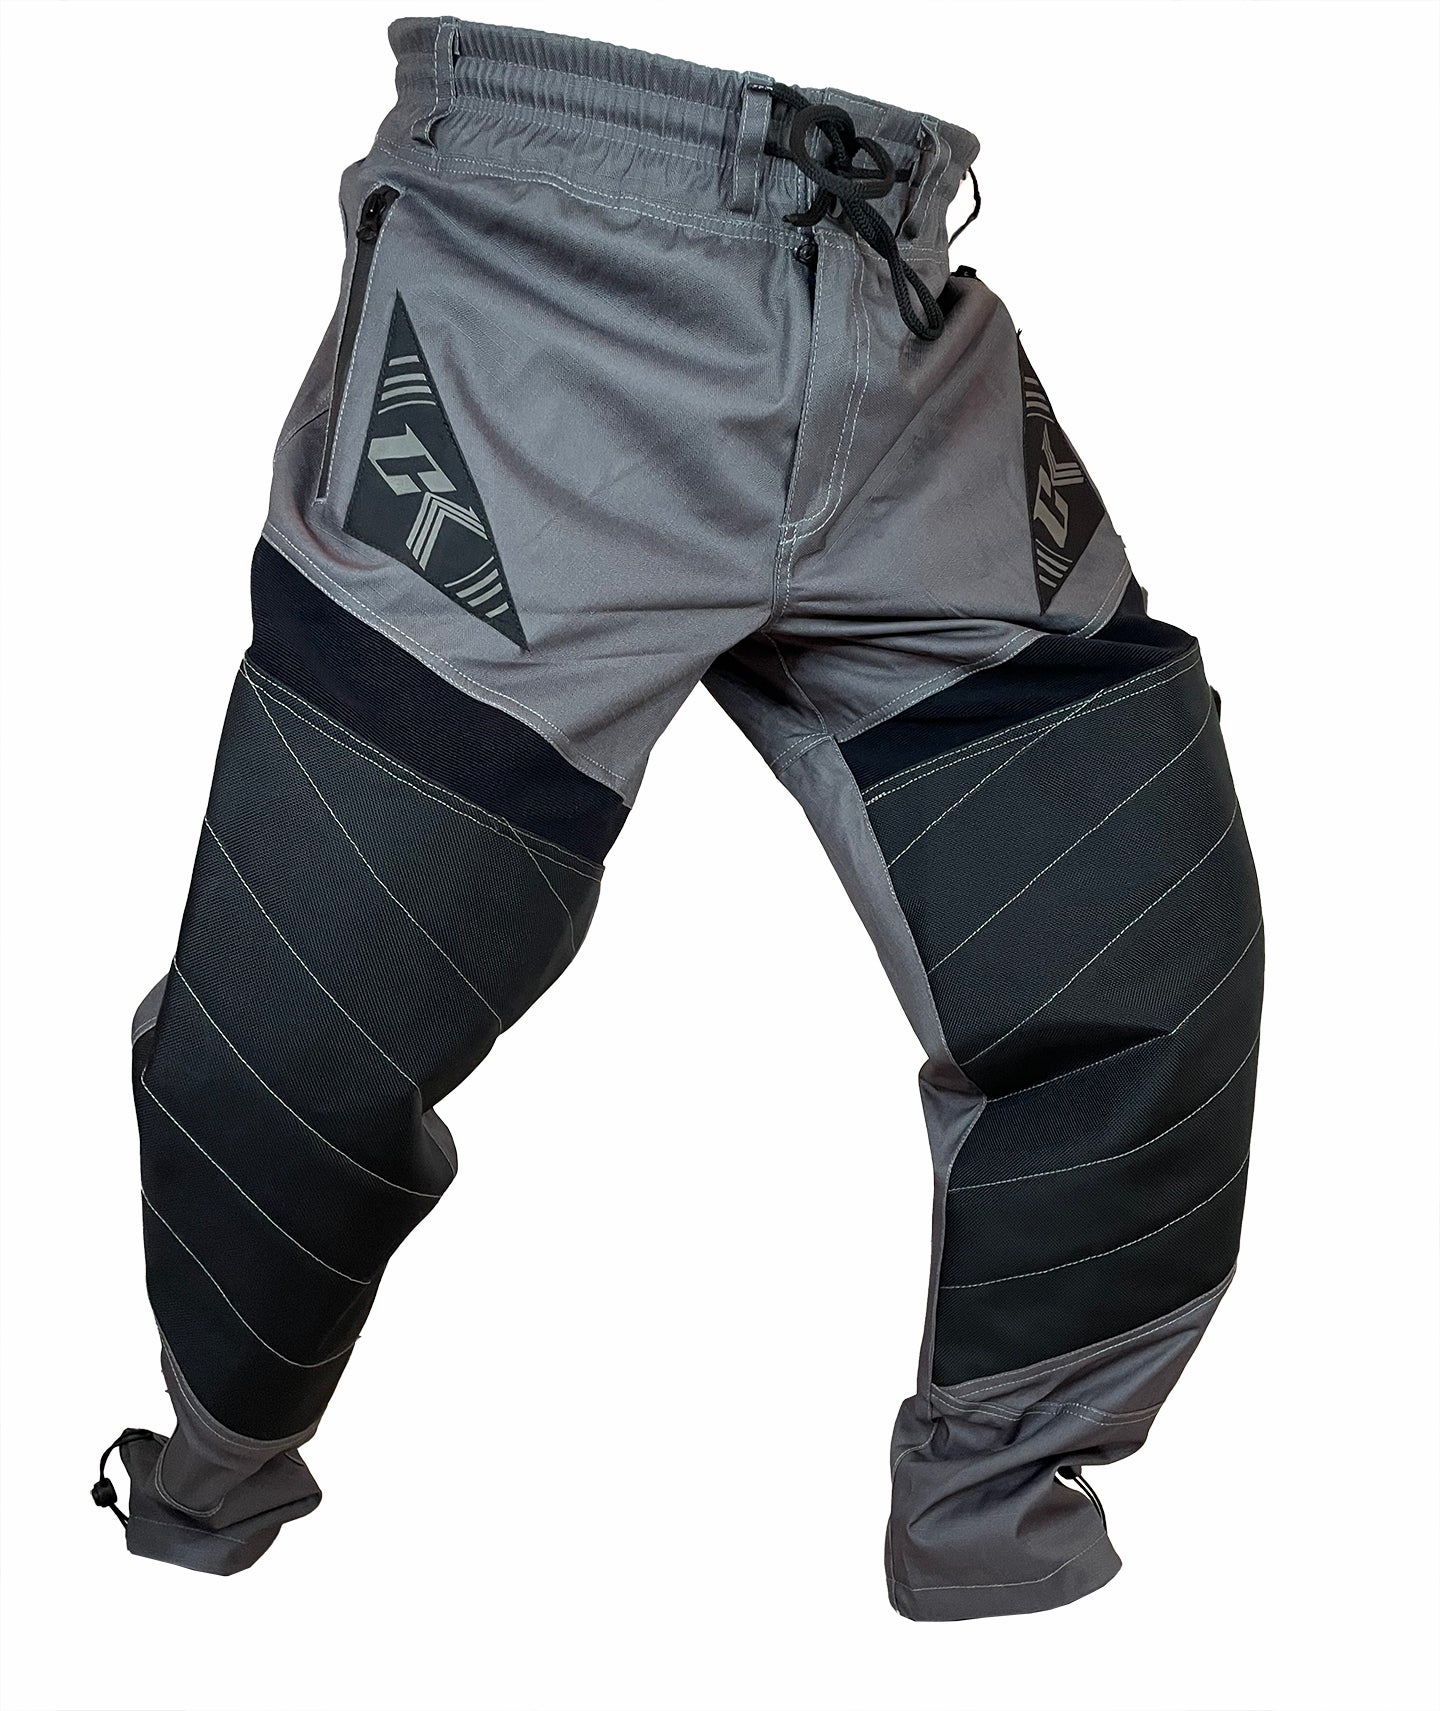 2022 CK PJ Paintball Pants - COOL GRAY NEW COLORWAY - CK Fight Life